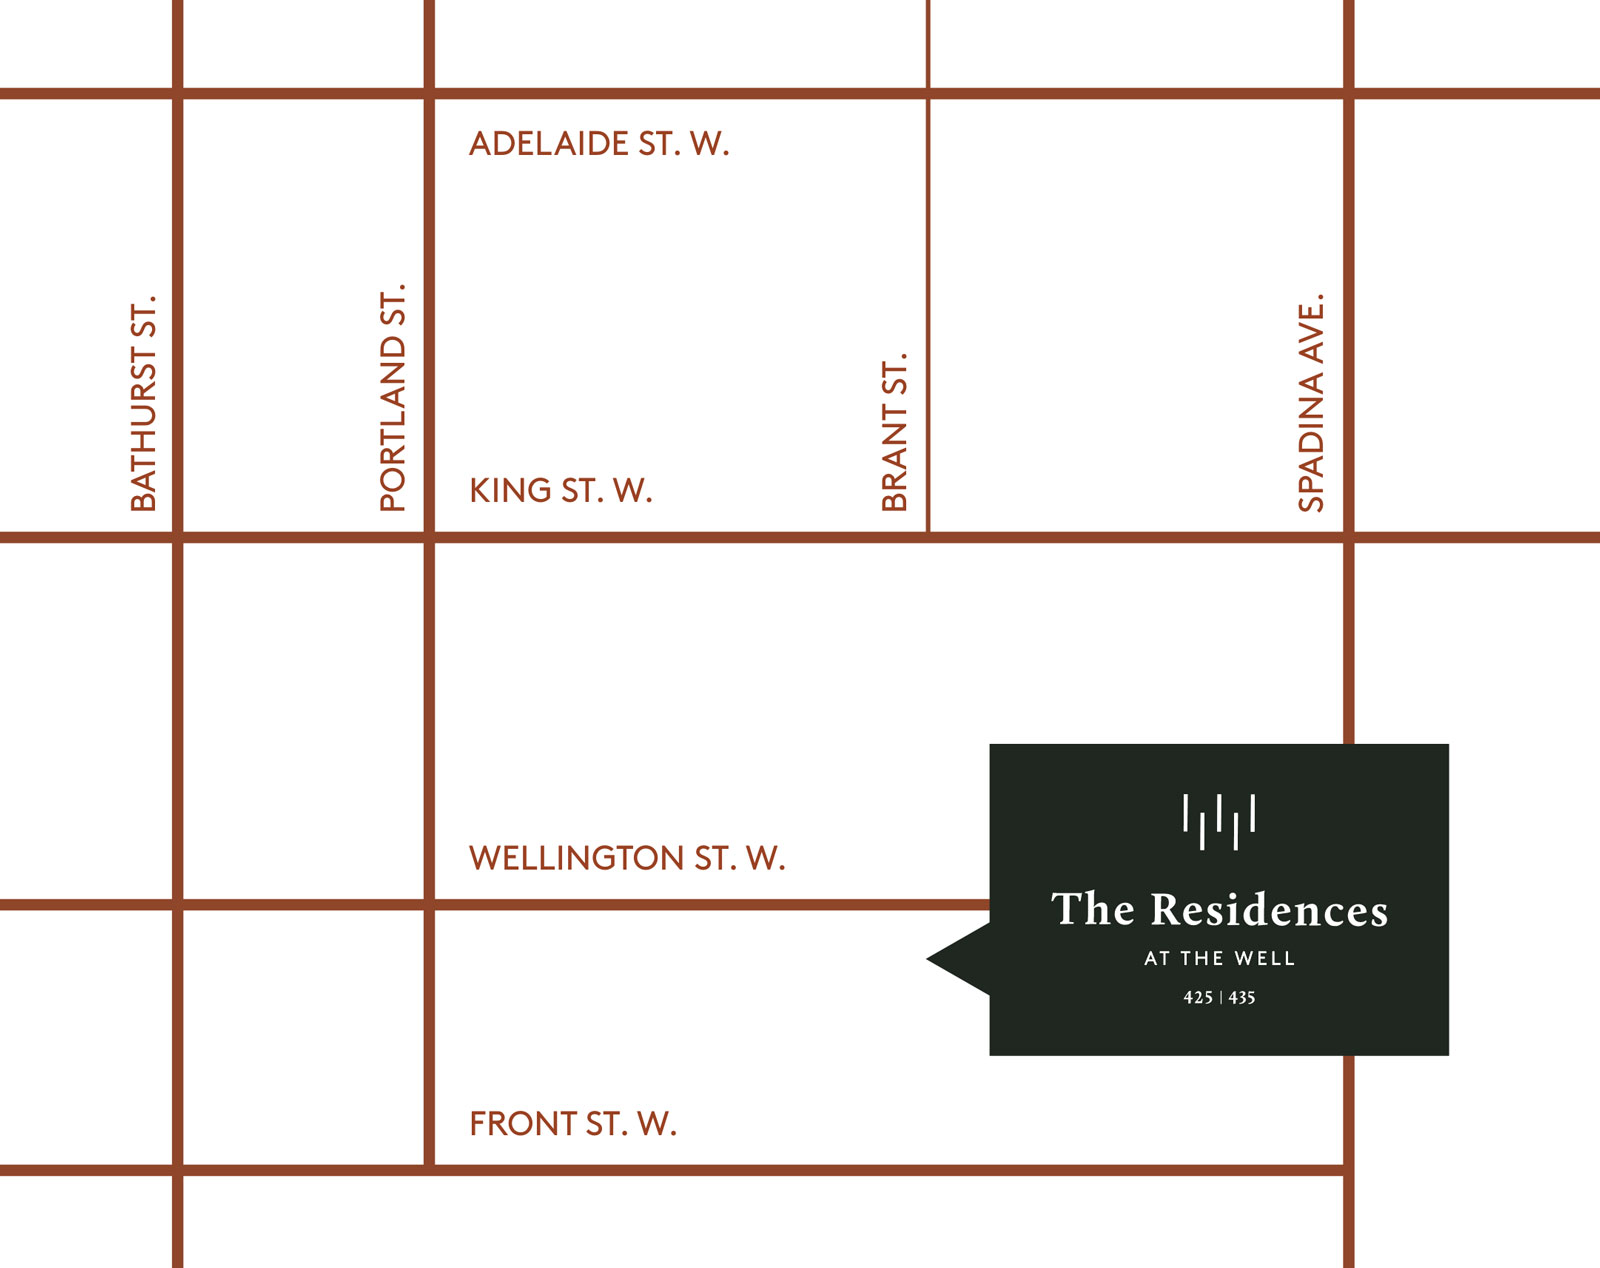 The Residences Location